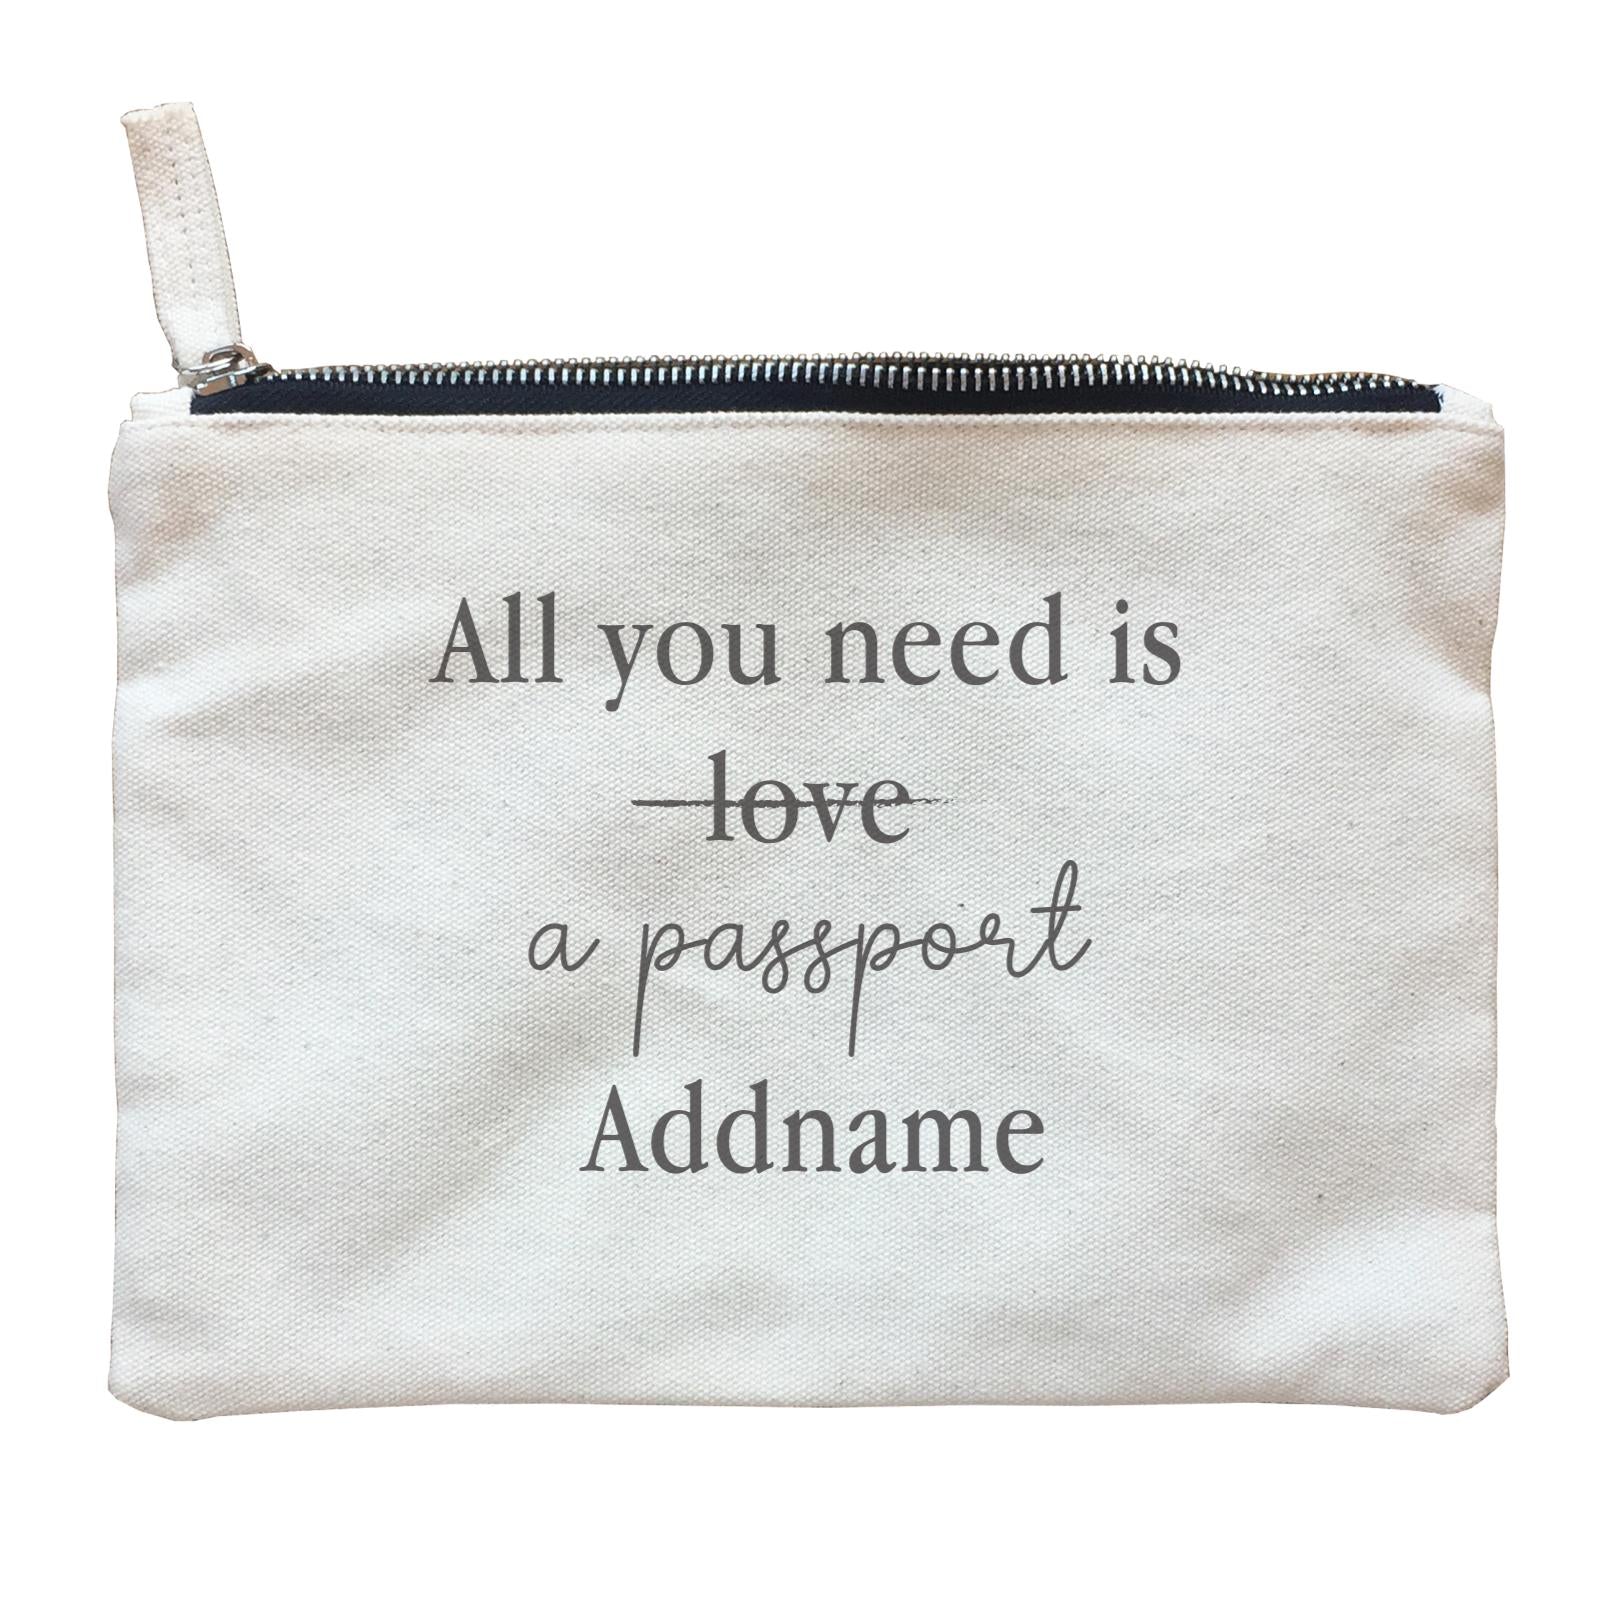 Travel Quotes All You Need Is A Passport Addname Zipper Pouch